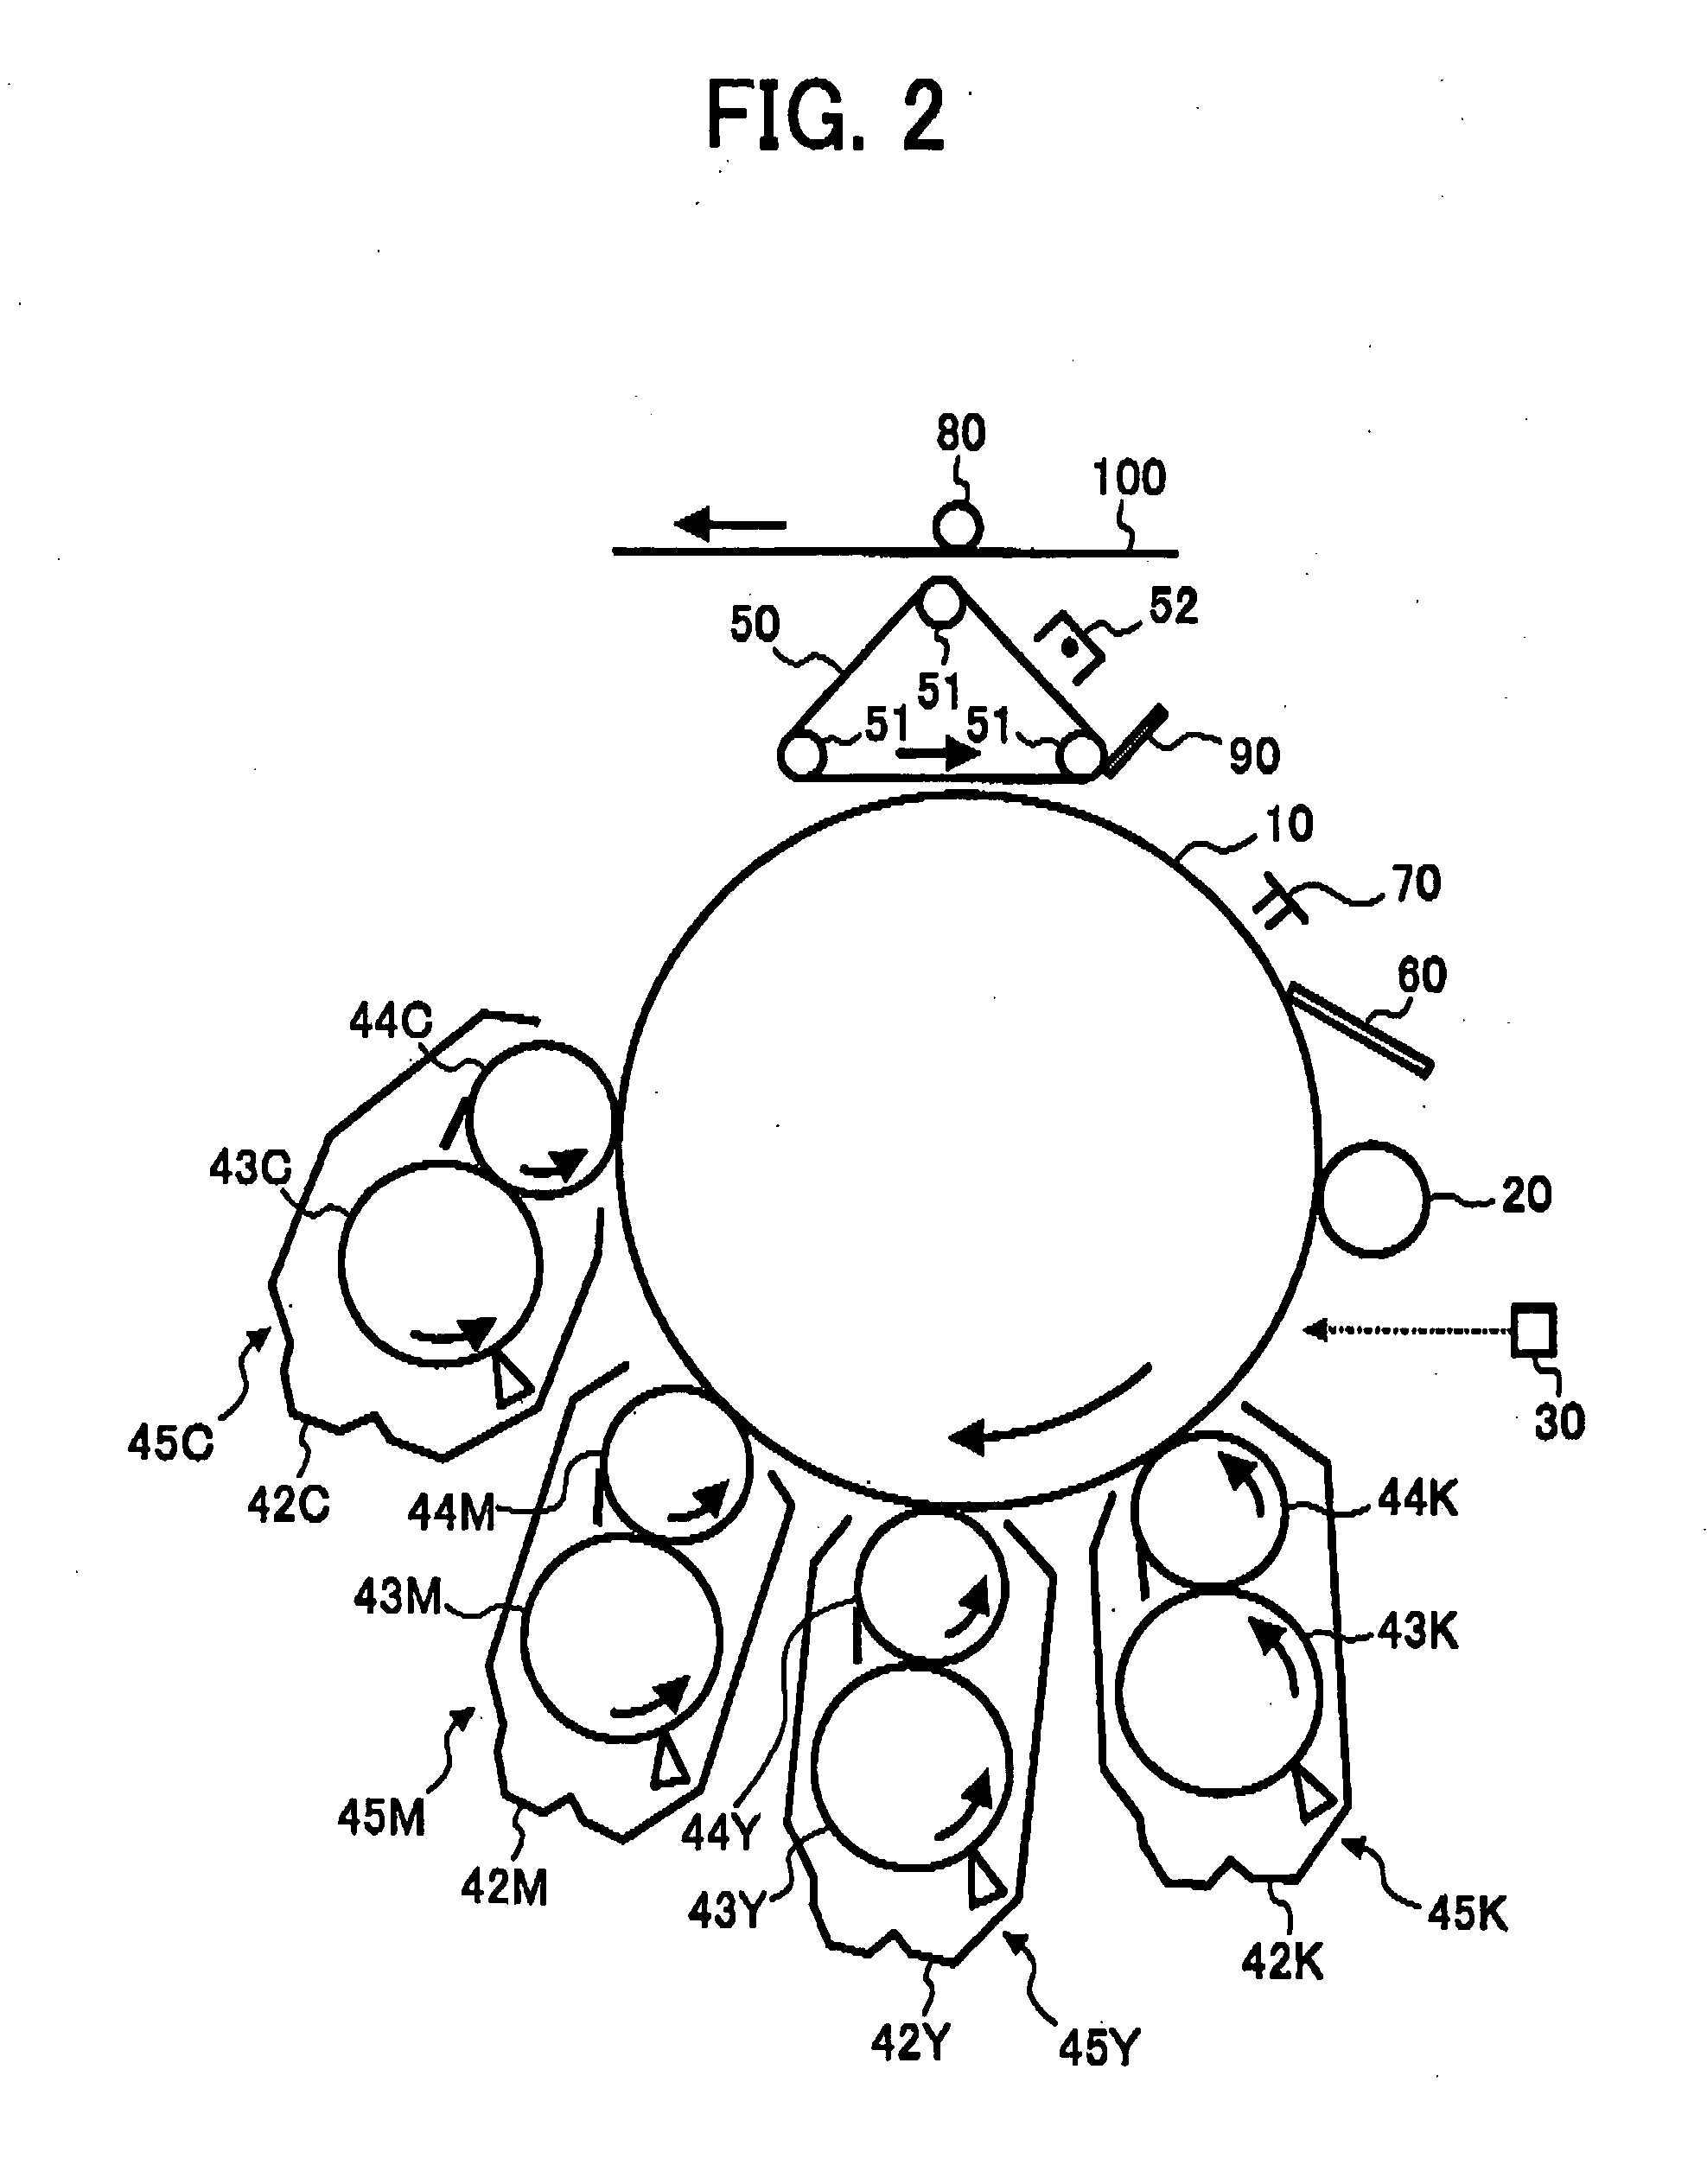 Toner, developer, image forming apparatus and image forming method